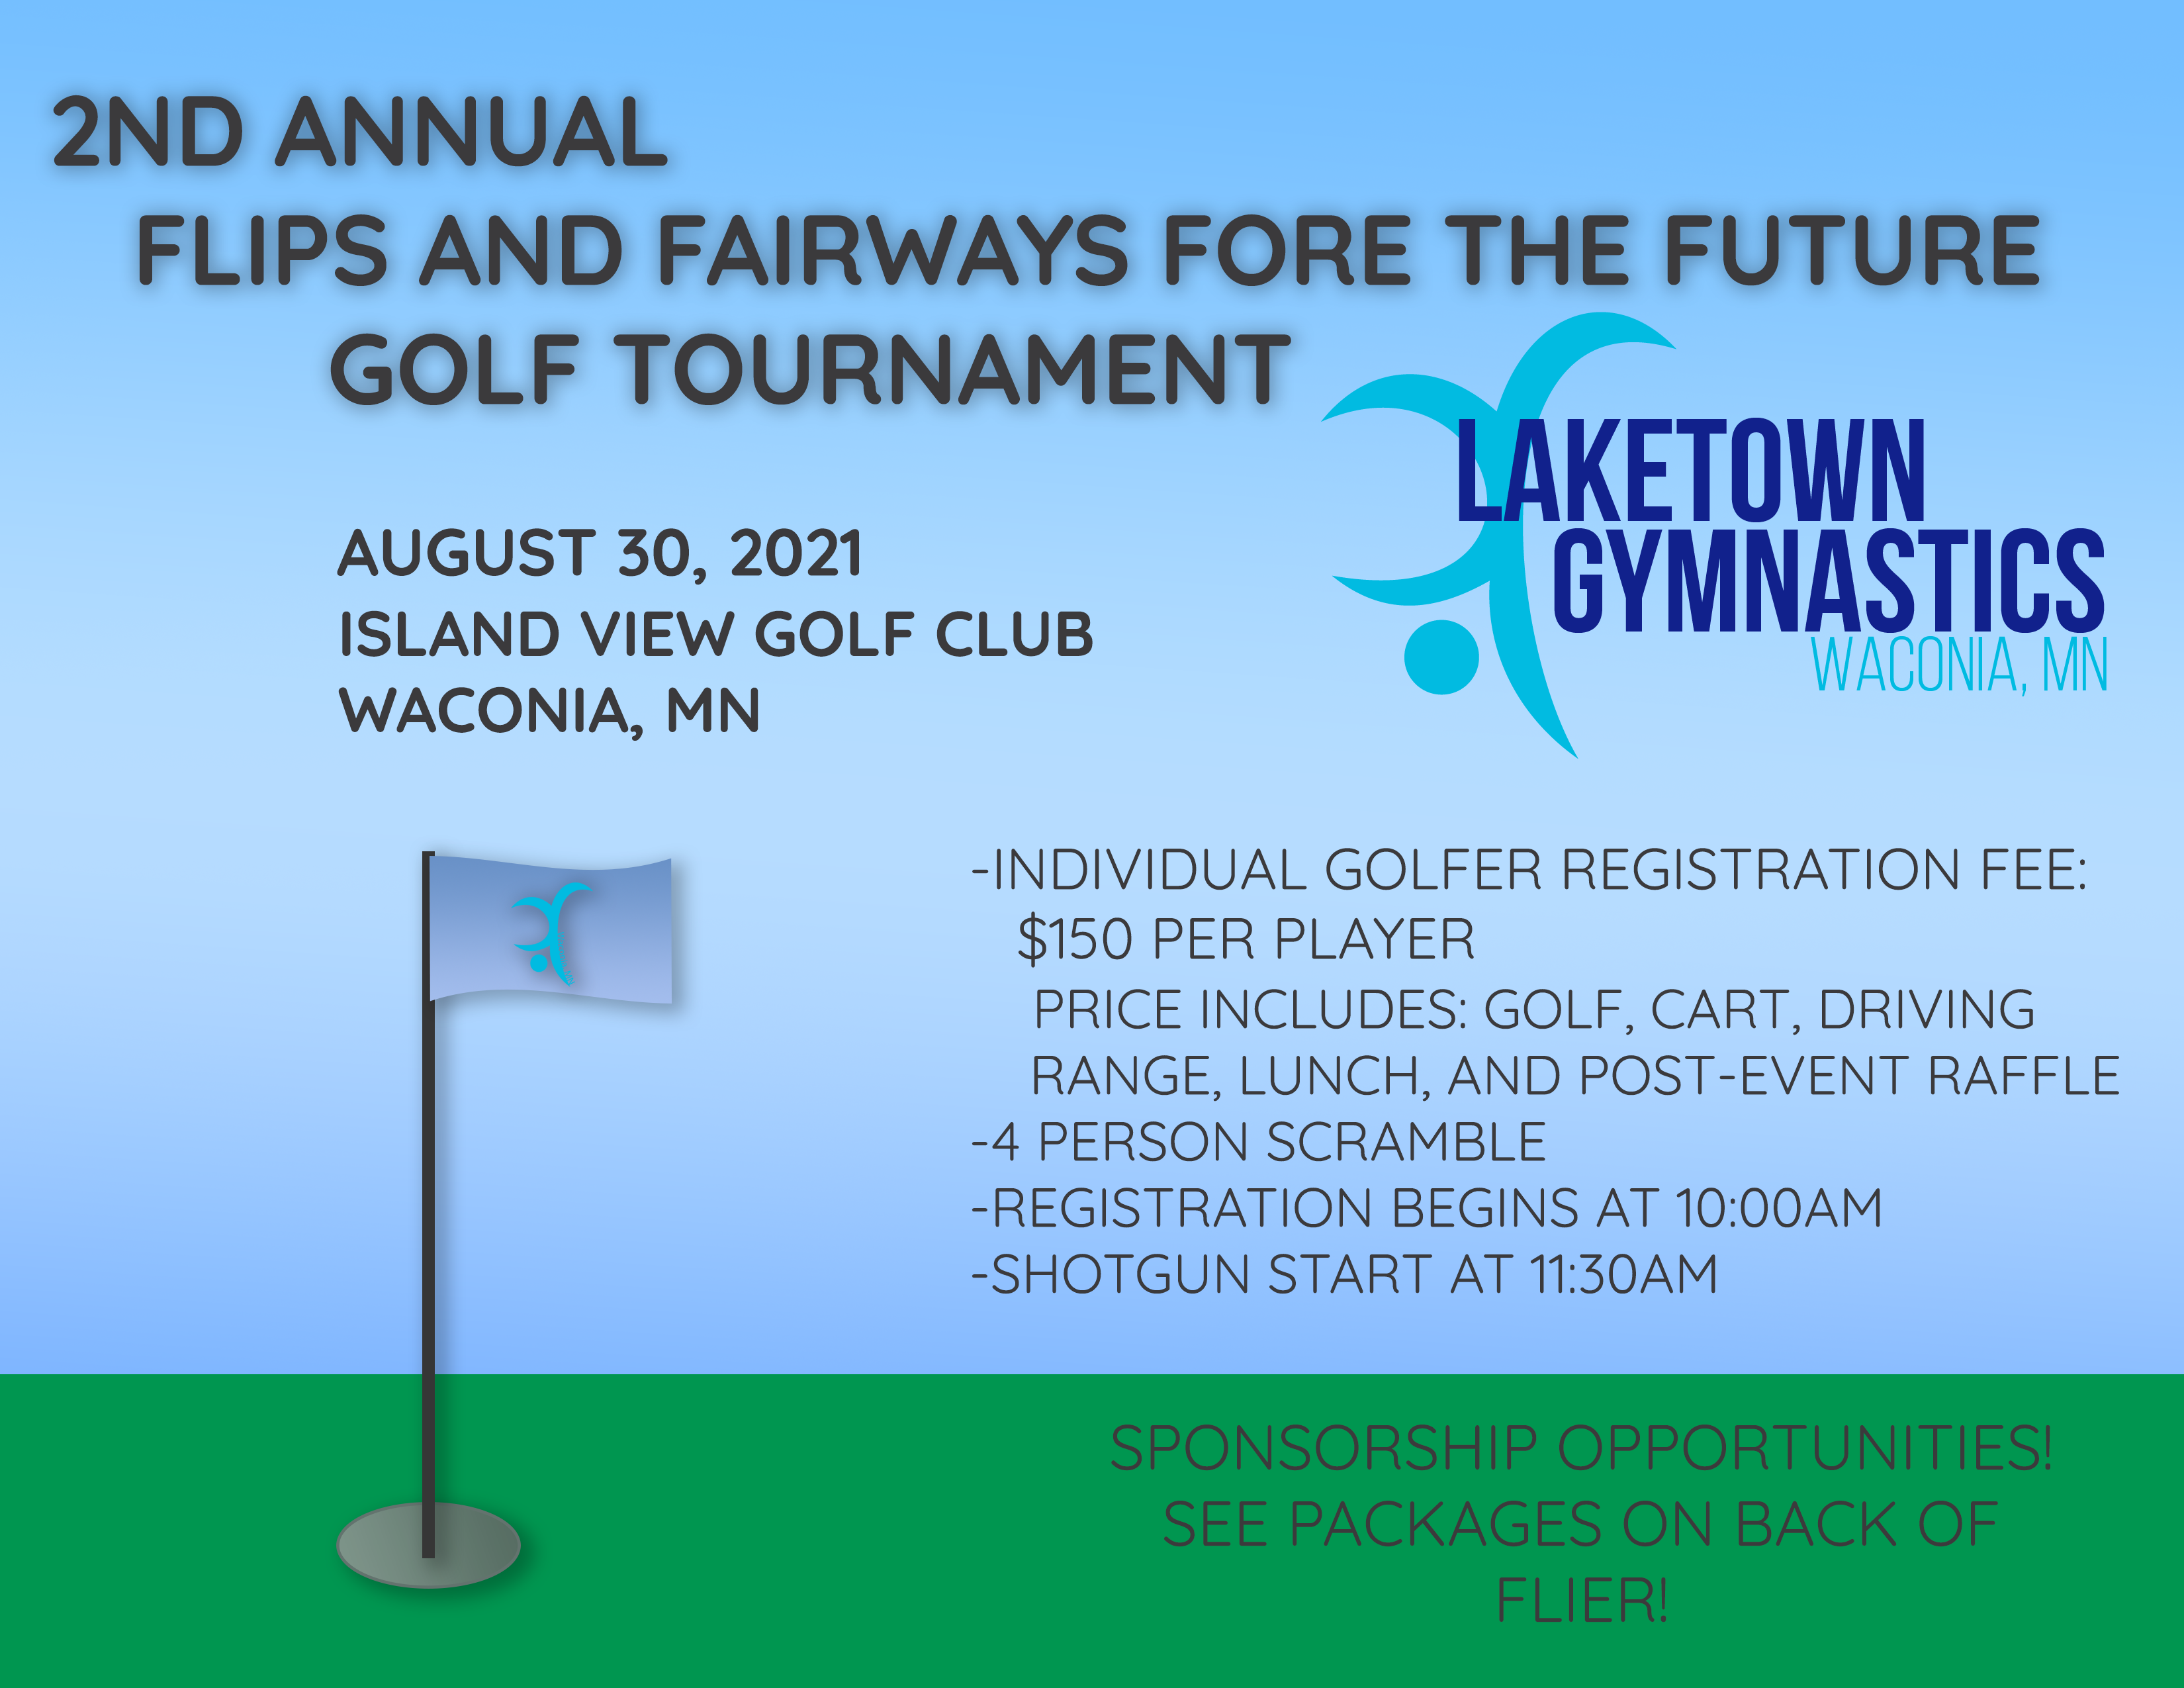 Laketown Gymnastics 2nd Annual Flips and Fairways Fore the Future Golf